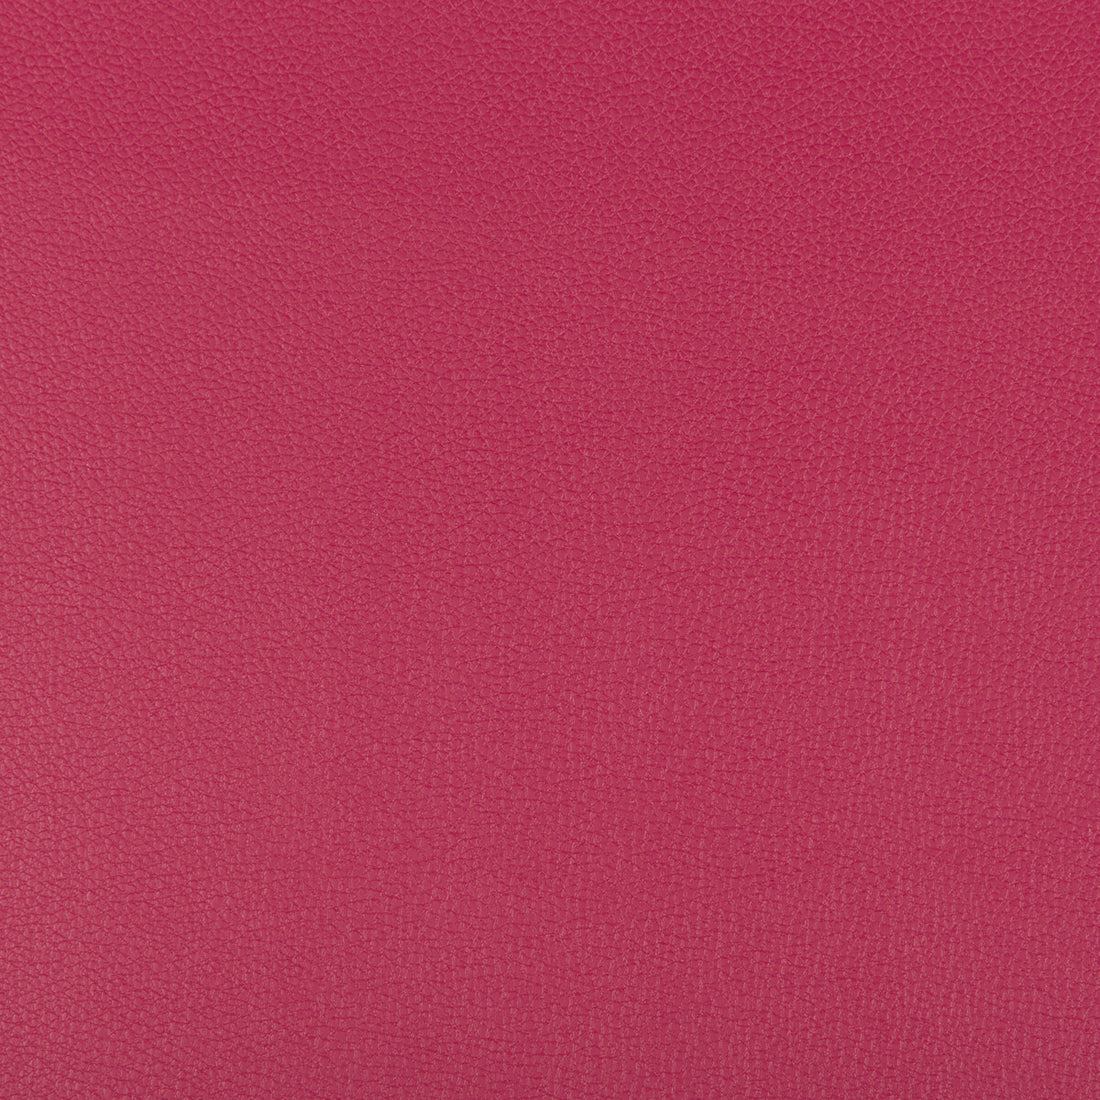 Syrus fabric in fuschia color - pattern SYRUS.7.0 - by Kravet Contract